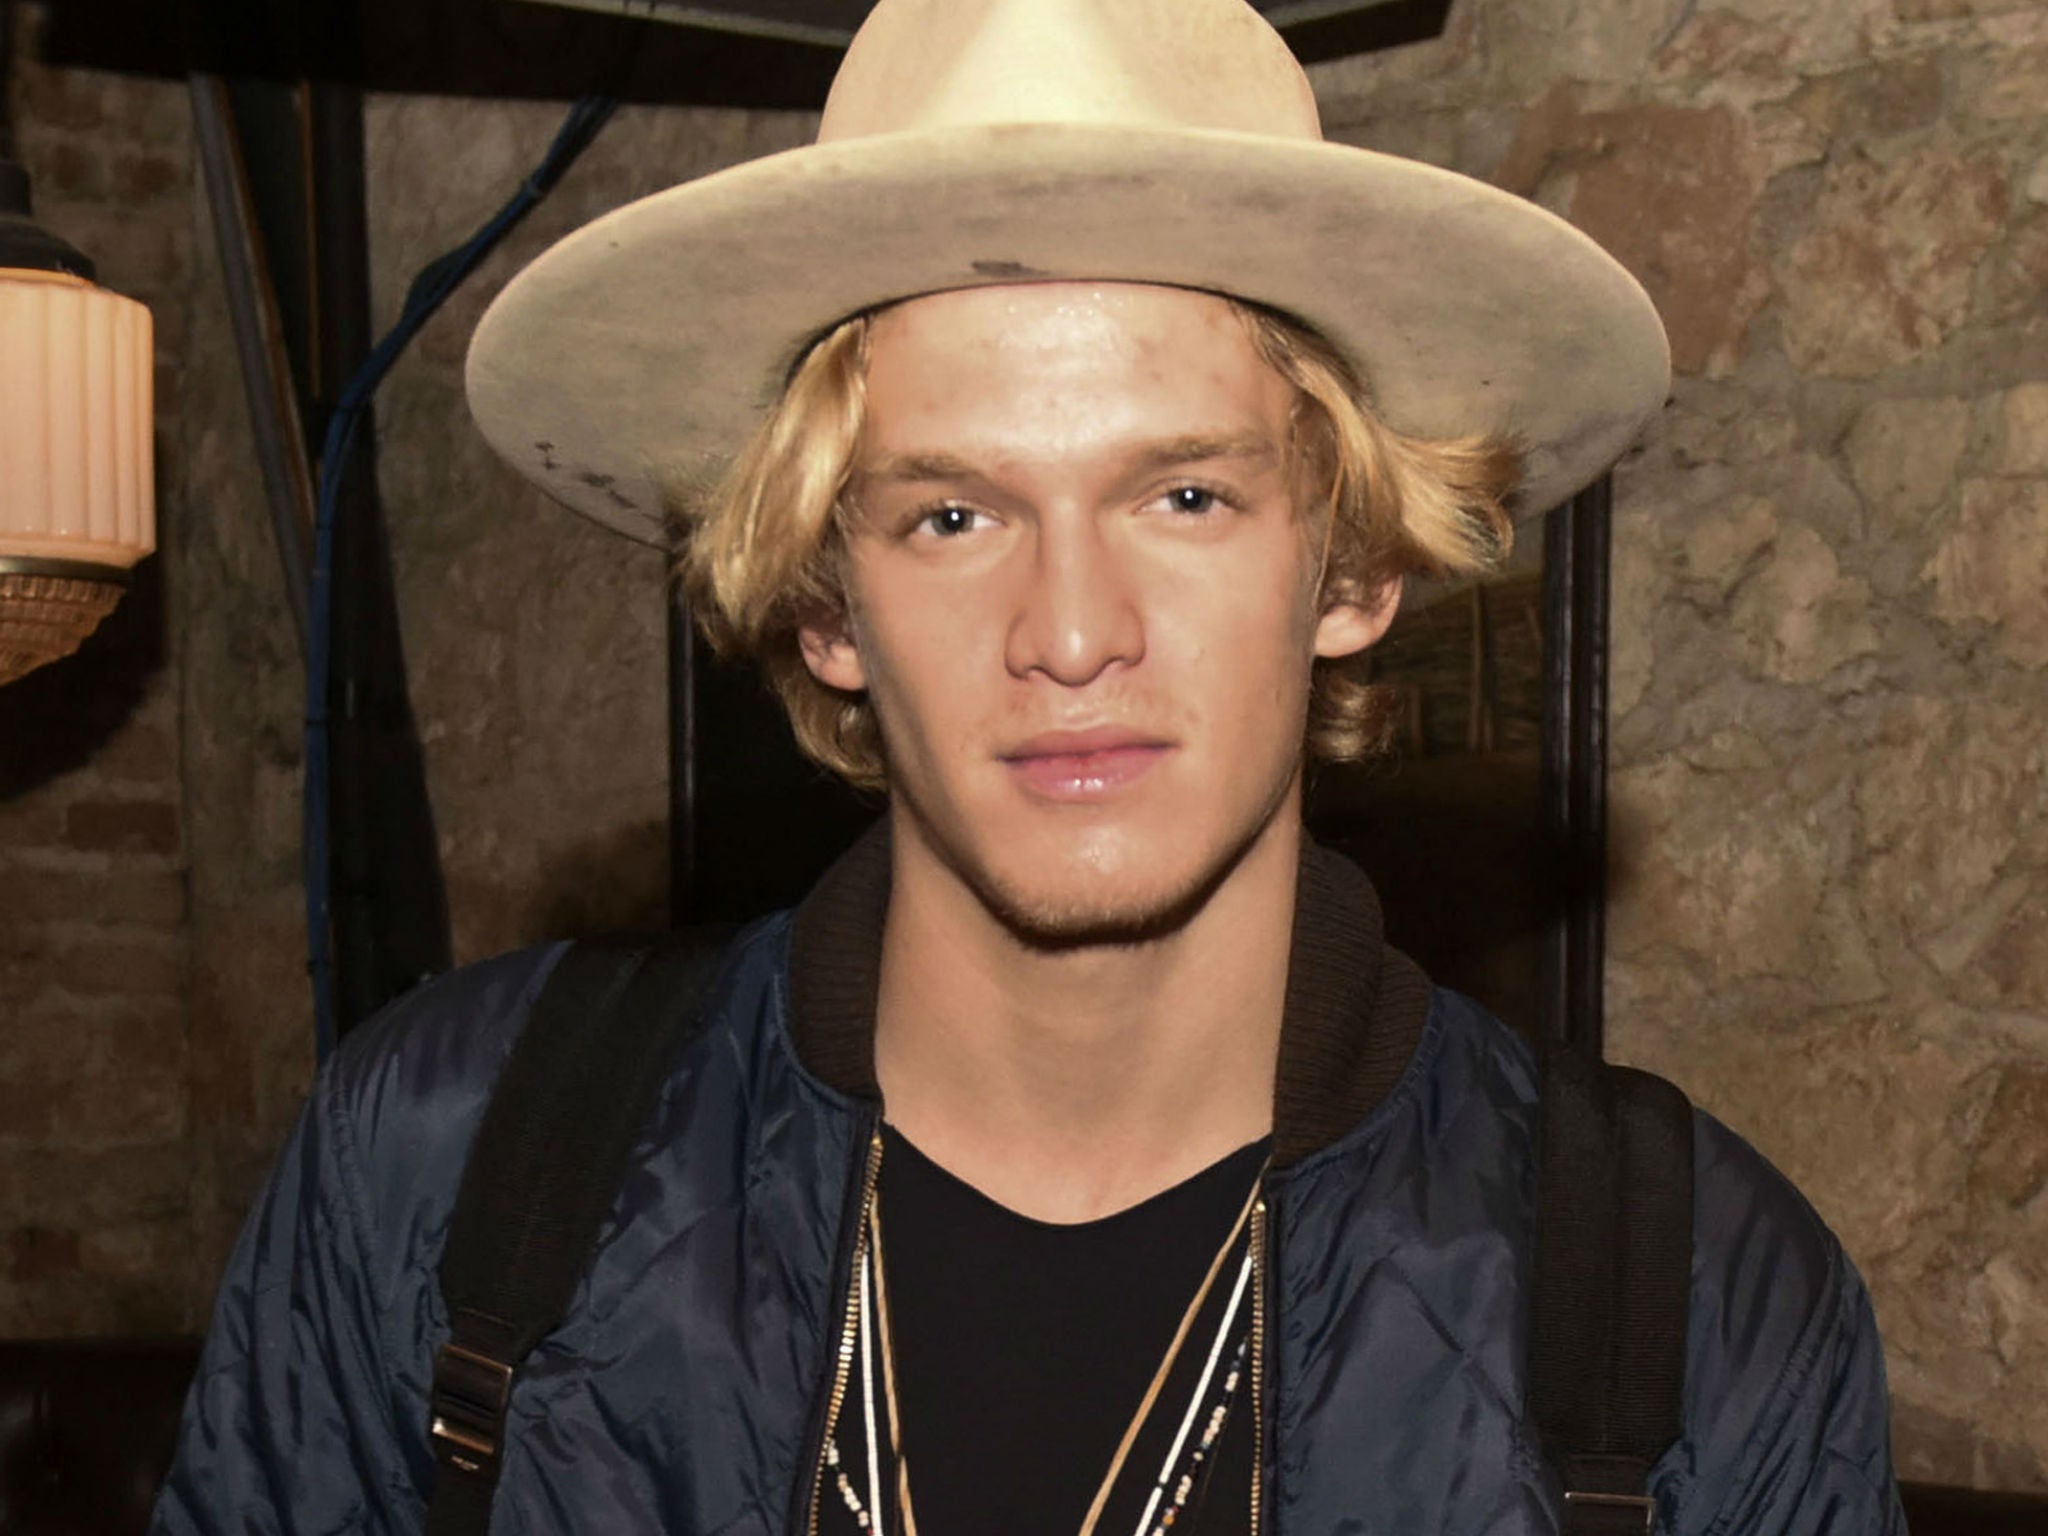 Cody Simpson donated his Twitter account to a Syrian refugee